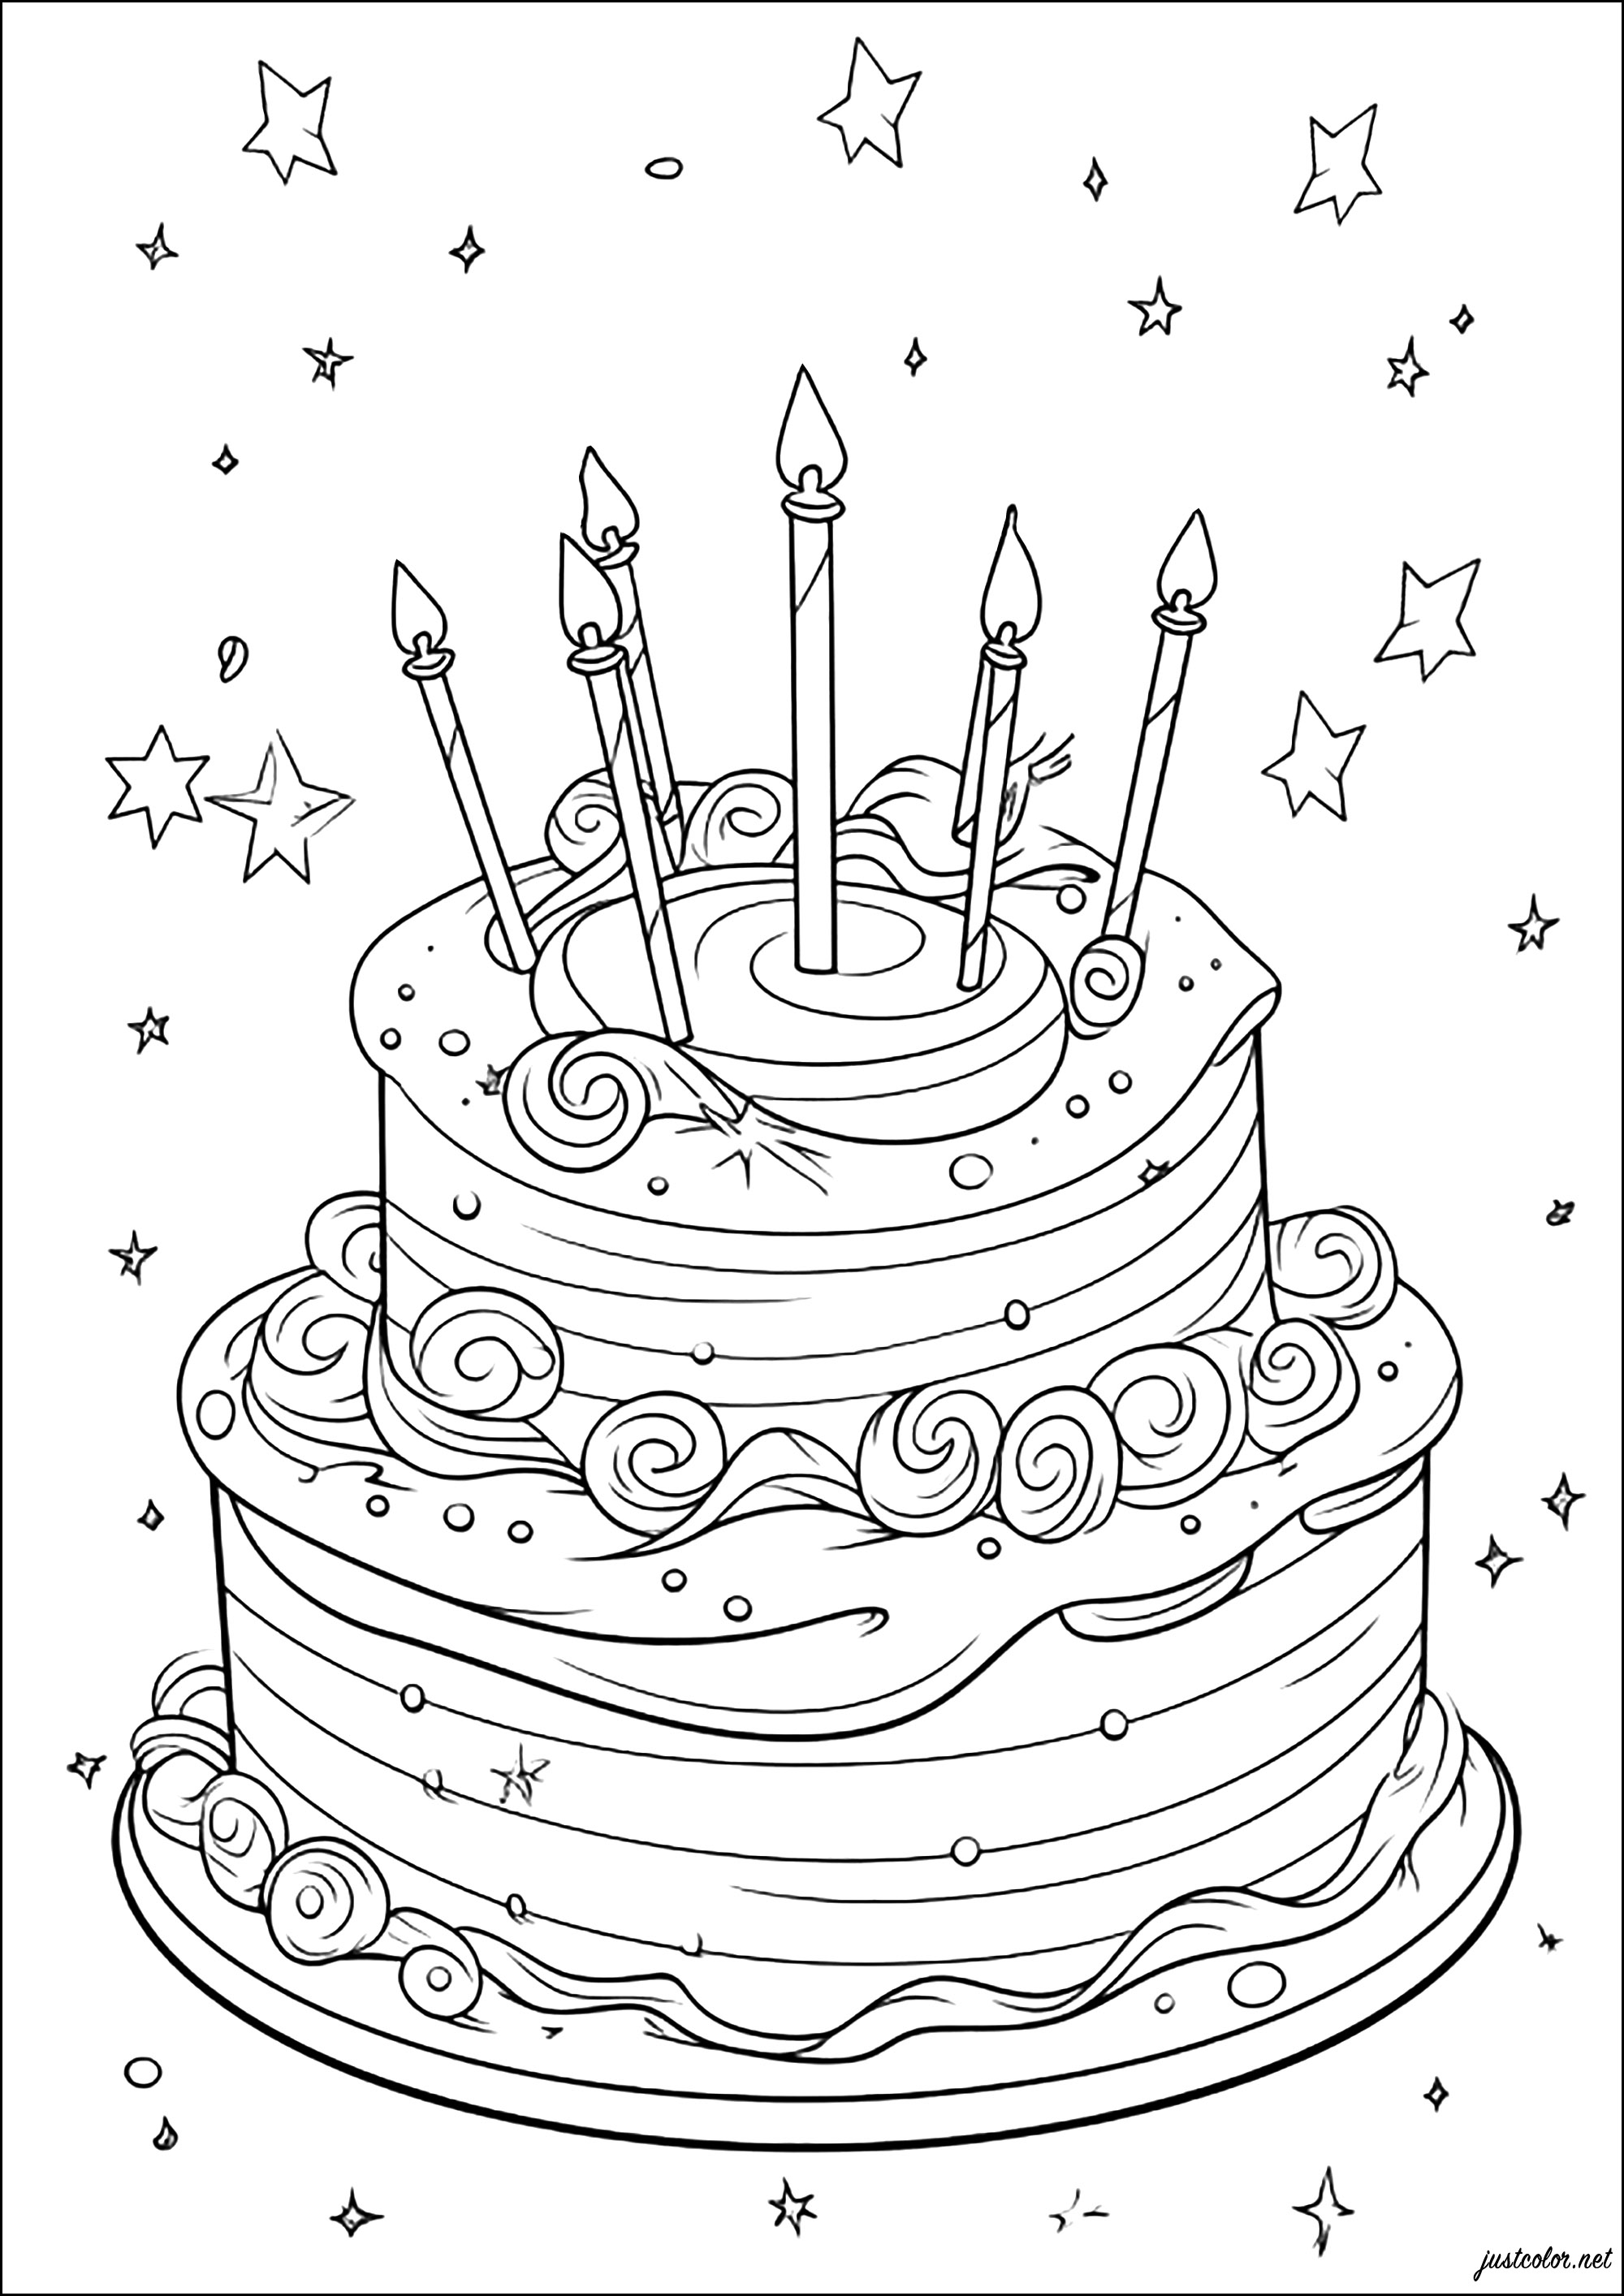 Huge birthday cake with starry background